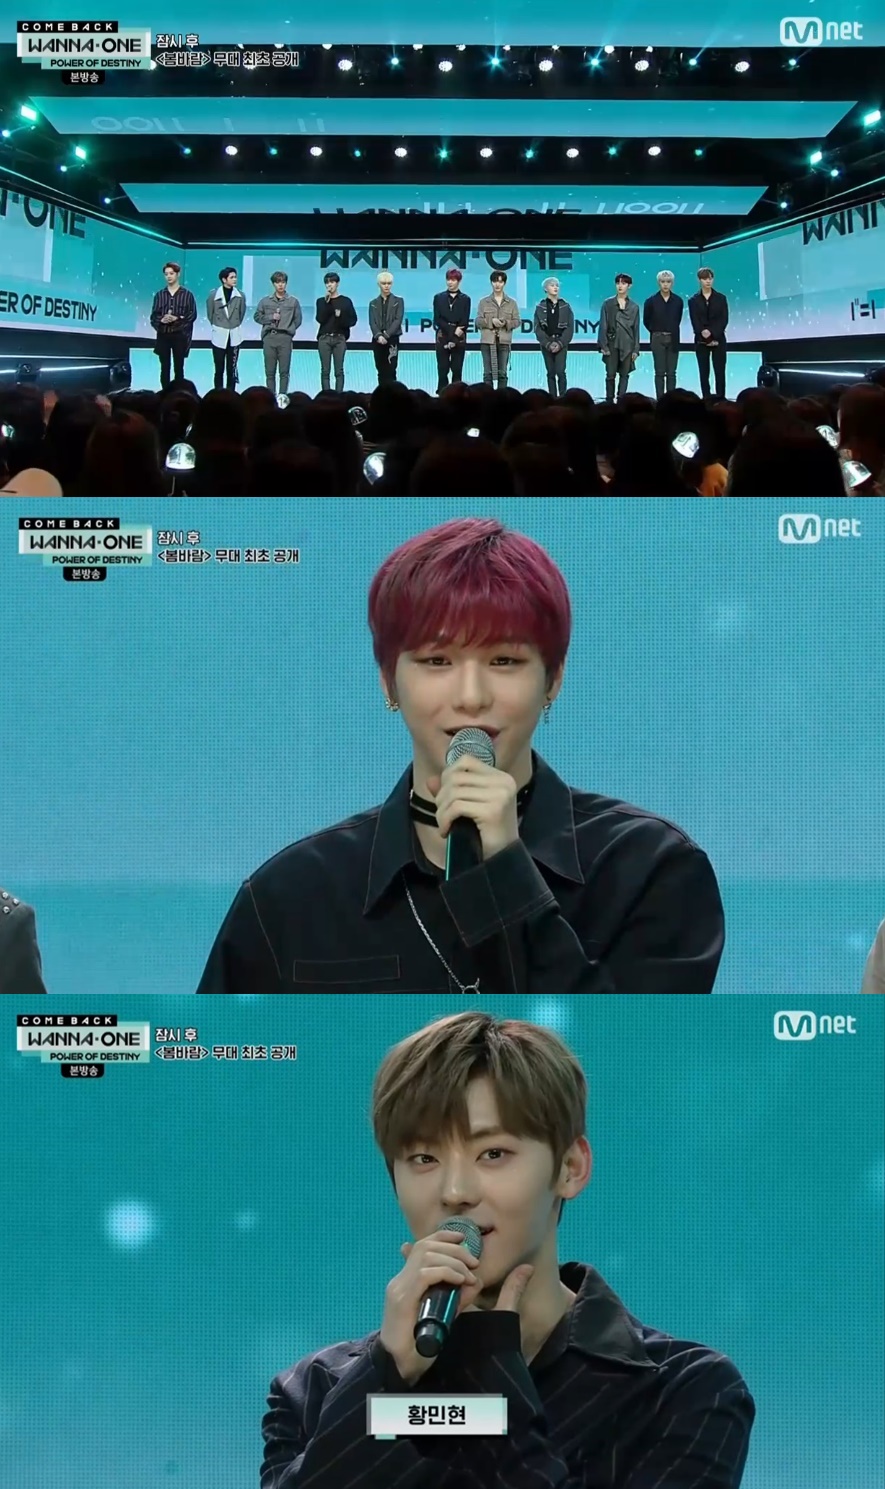 , Big Gift FeatureWanna One gets first place on real-time chartI expressed my feelings.Wanna One made a comeback show at Mnet Wanna One comeback show: POWER OF DESTINY broadcast on November 22.Ong Sung-woo said, I wanted to see a lot of it. Park Jihoon said, I am nervous and nervous like the first time I have a regular album comeback show.Lee Dae-hui said, I will show you a wonderful stage as I prepared hard.We finished the world tour safely, and it feels so good to come to Korea and see Wannable in our hometown, Kang Daniel said.Ha Sung-woon emphasized, Please wait a little because not only the spring wind stage but also another new song stage will be released for the first time.emigration site